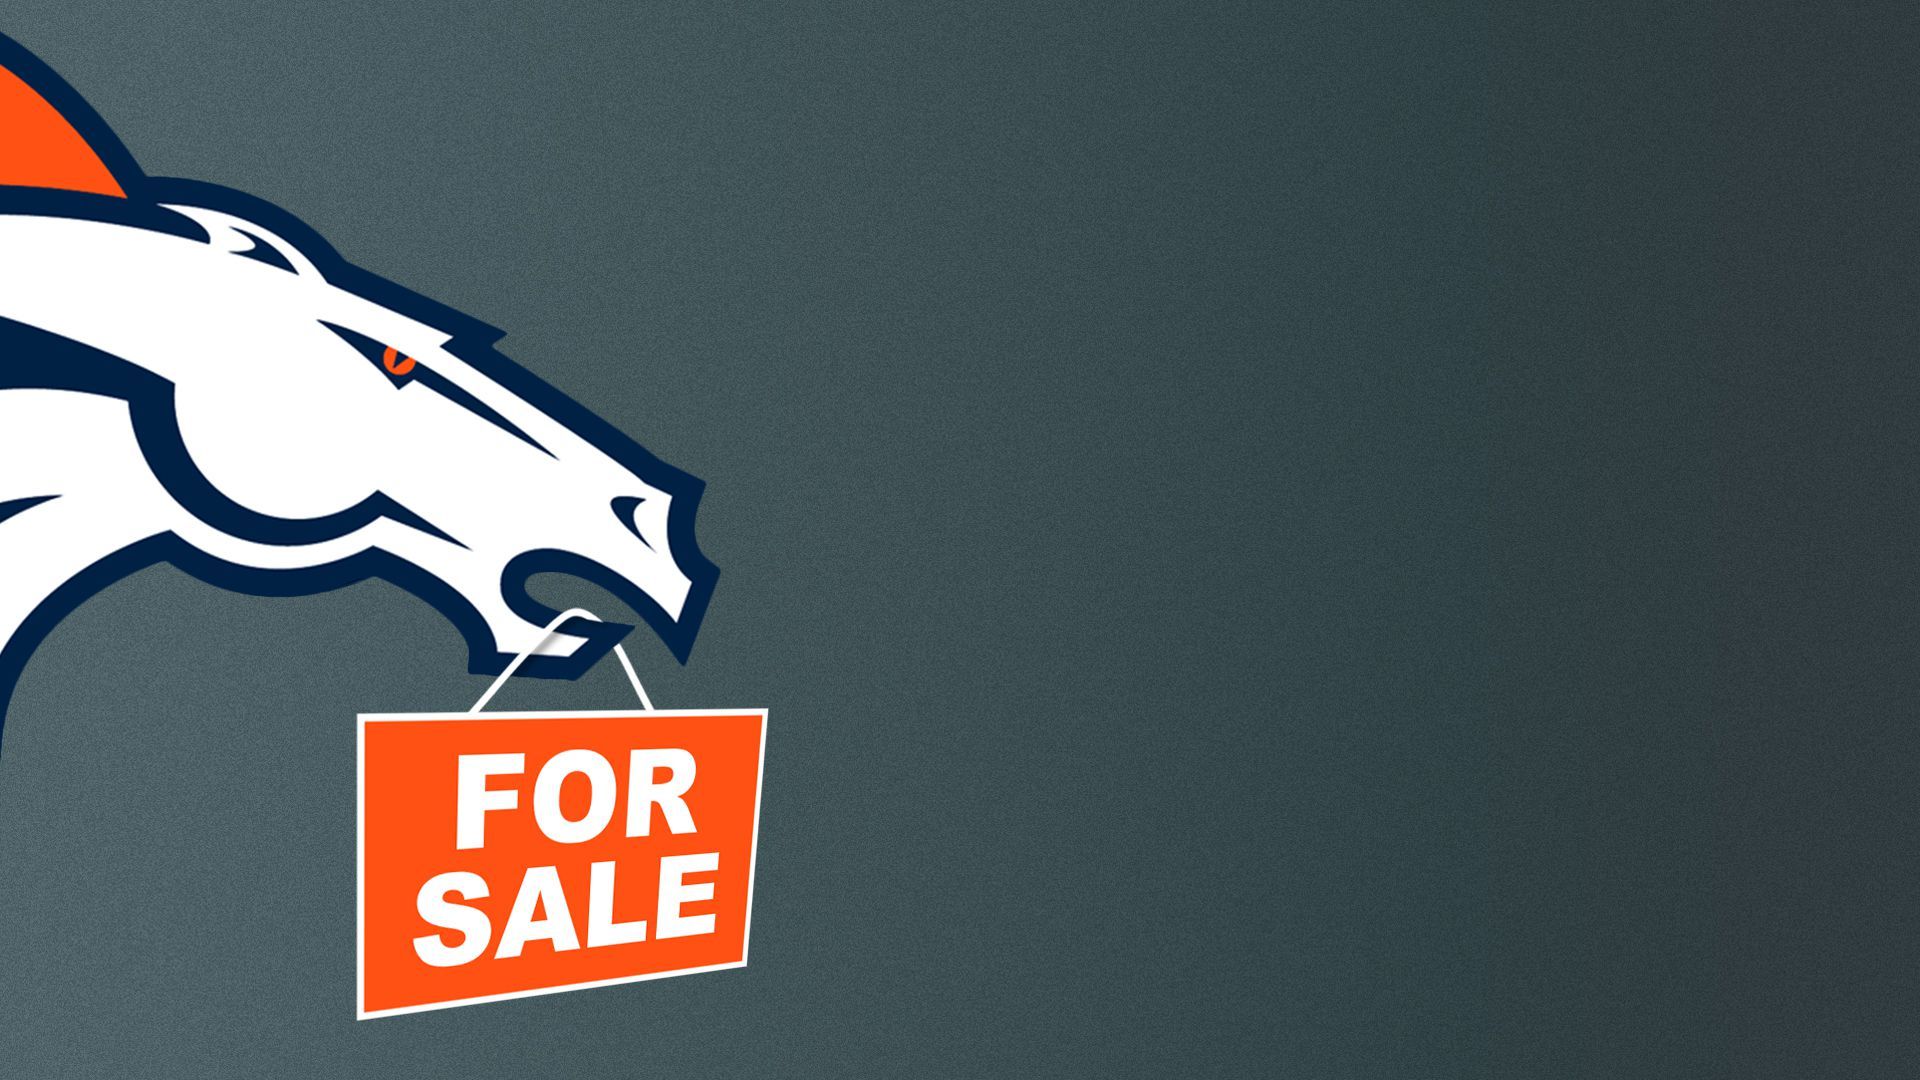 Illustration of the Denver Broncos logo holding a “For Sale” sign in its mouth.